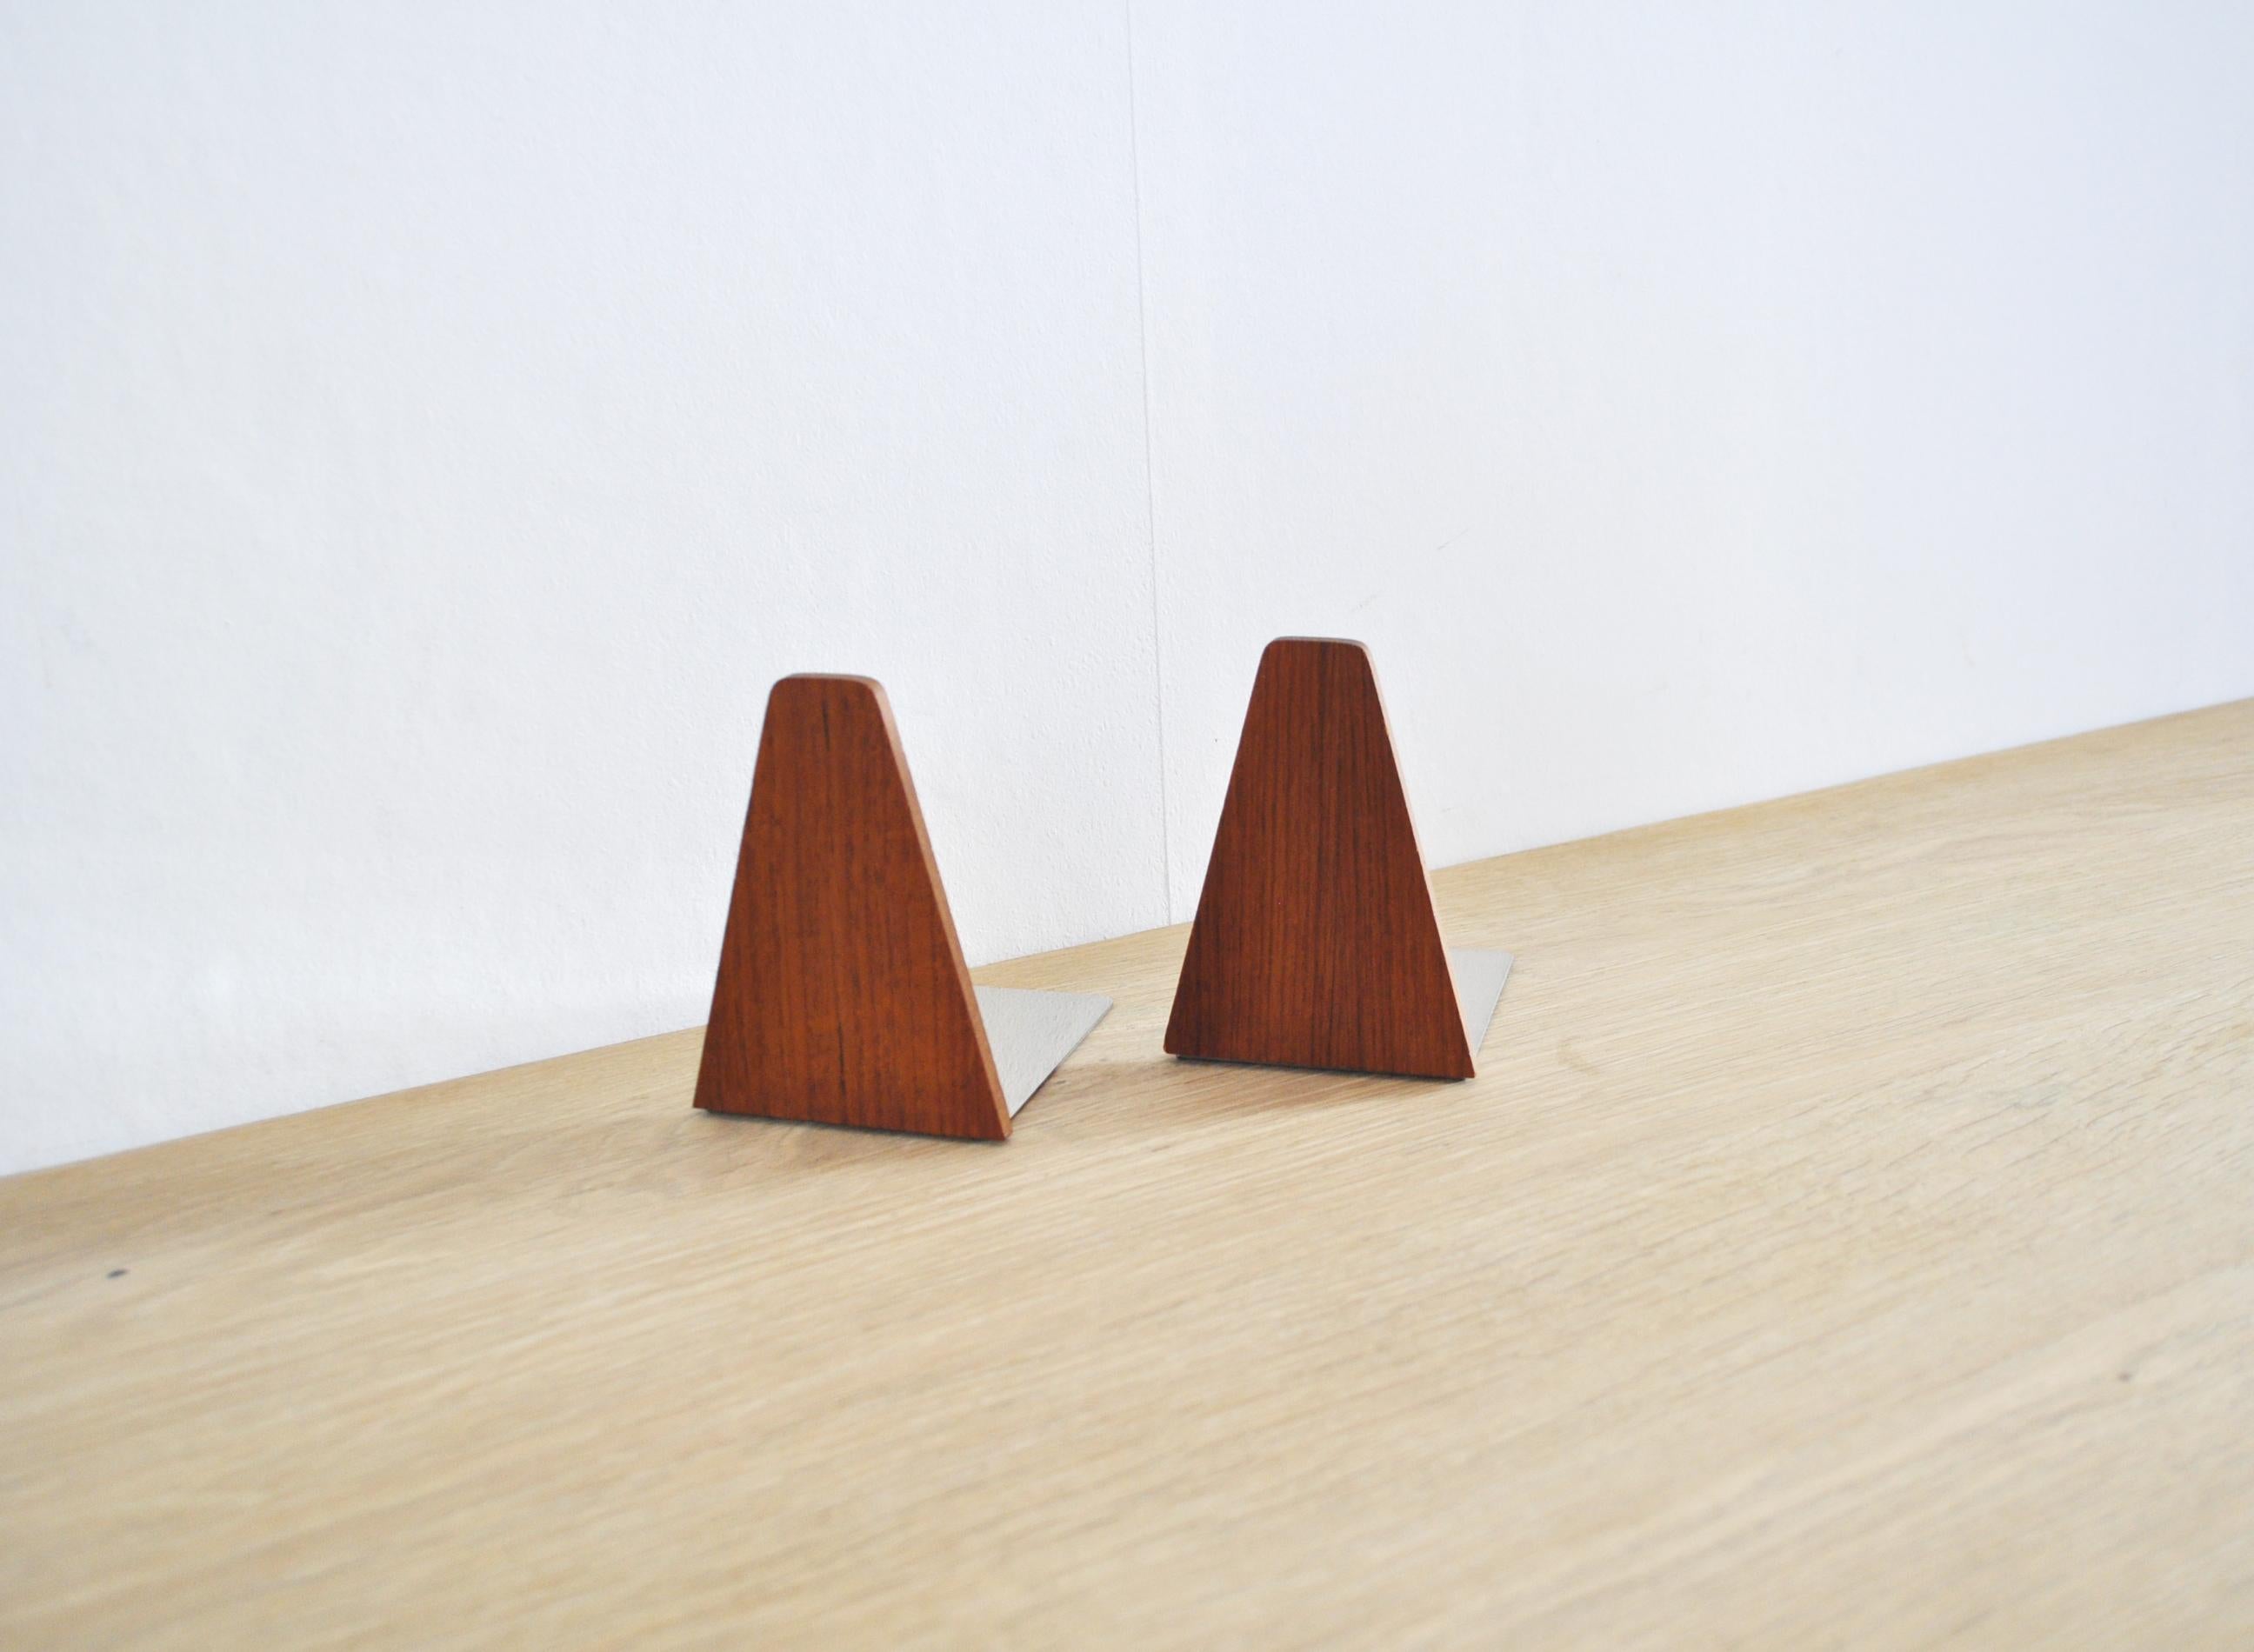 A set of two bookends in teak with steel rests,
Denmark, 1960s. Signs of wear consistent with age.